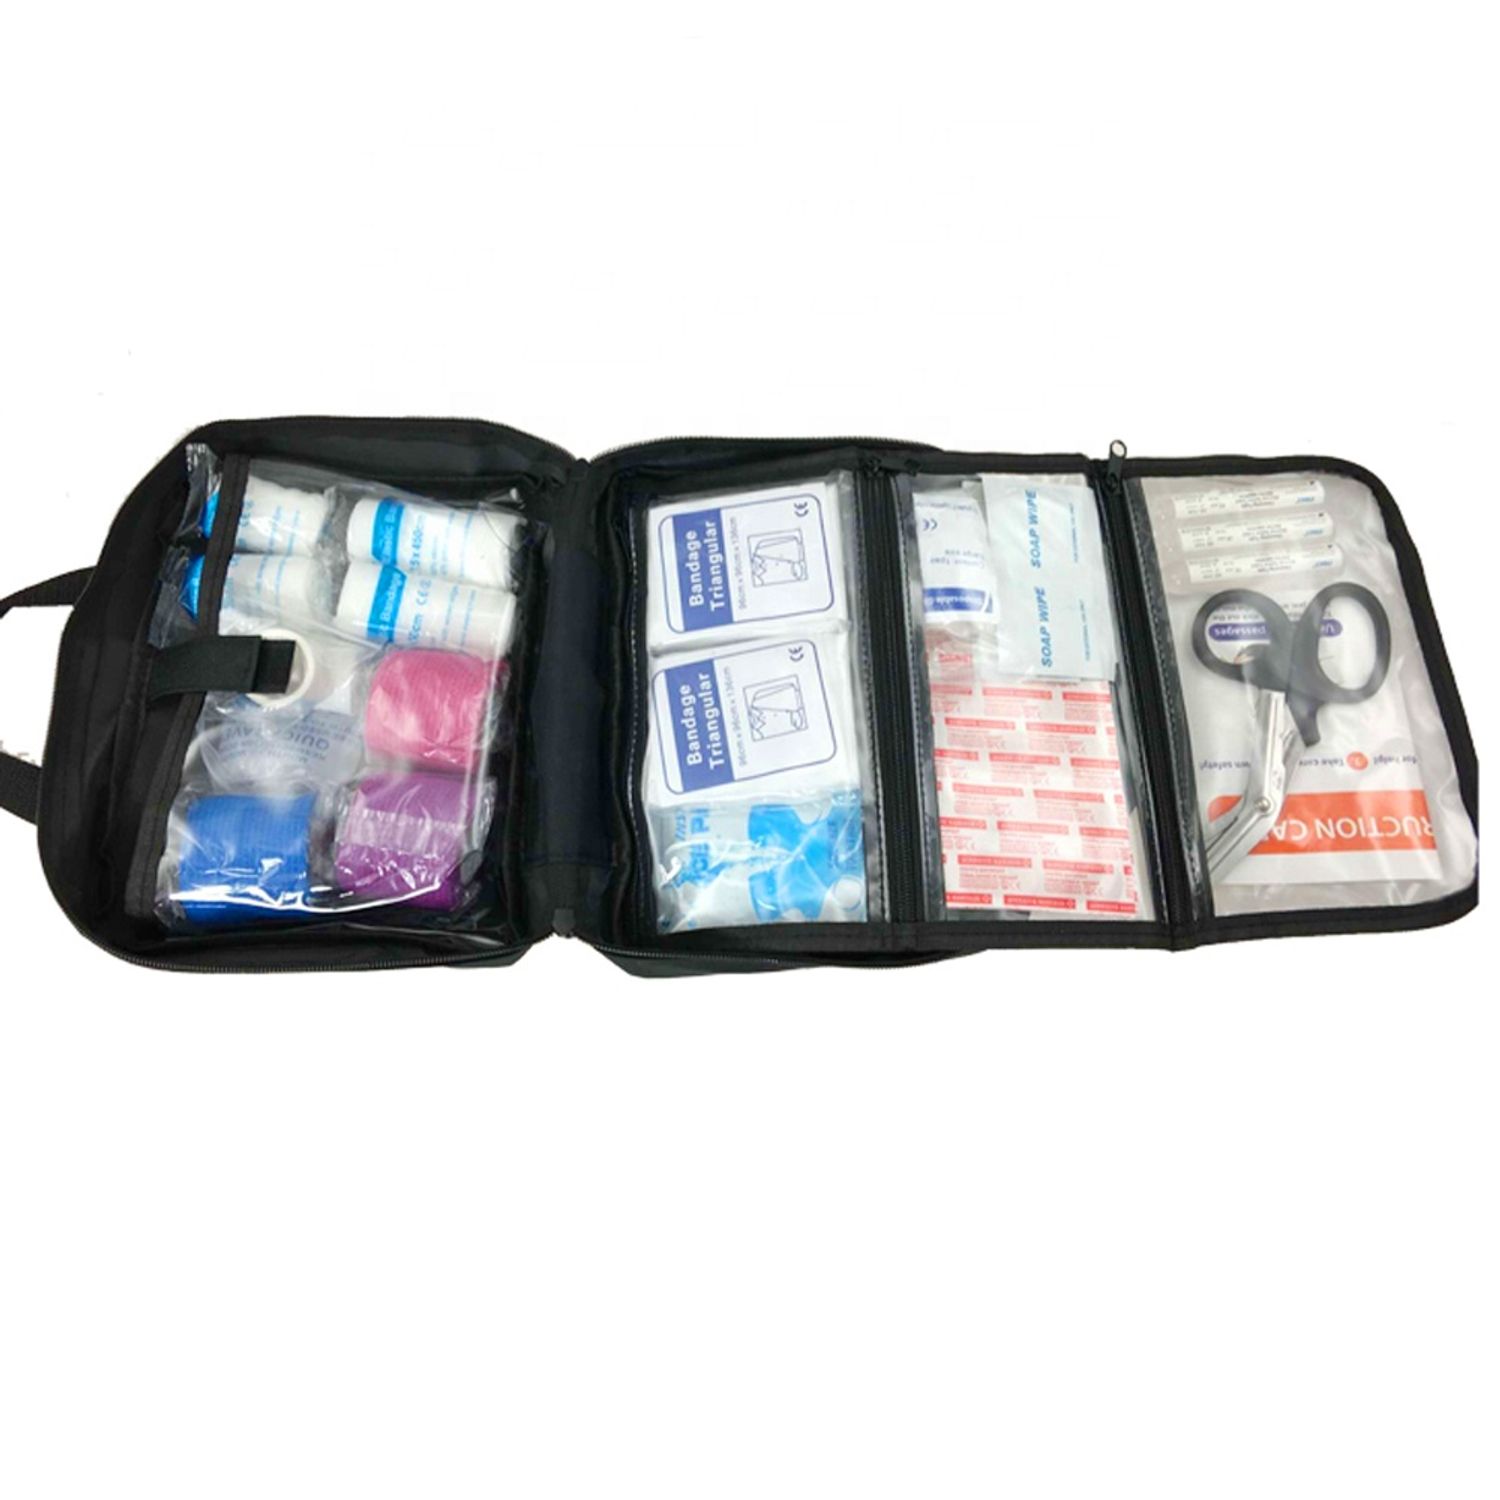 inside of Portable Medical Multi-Purpose Waterproof  First Aid Pet Care Kit 